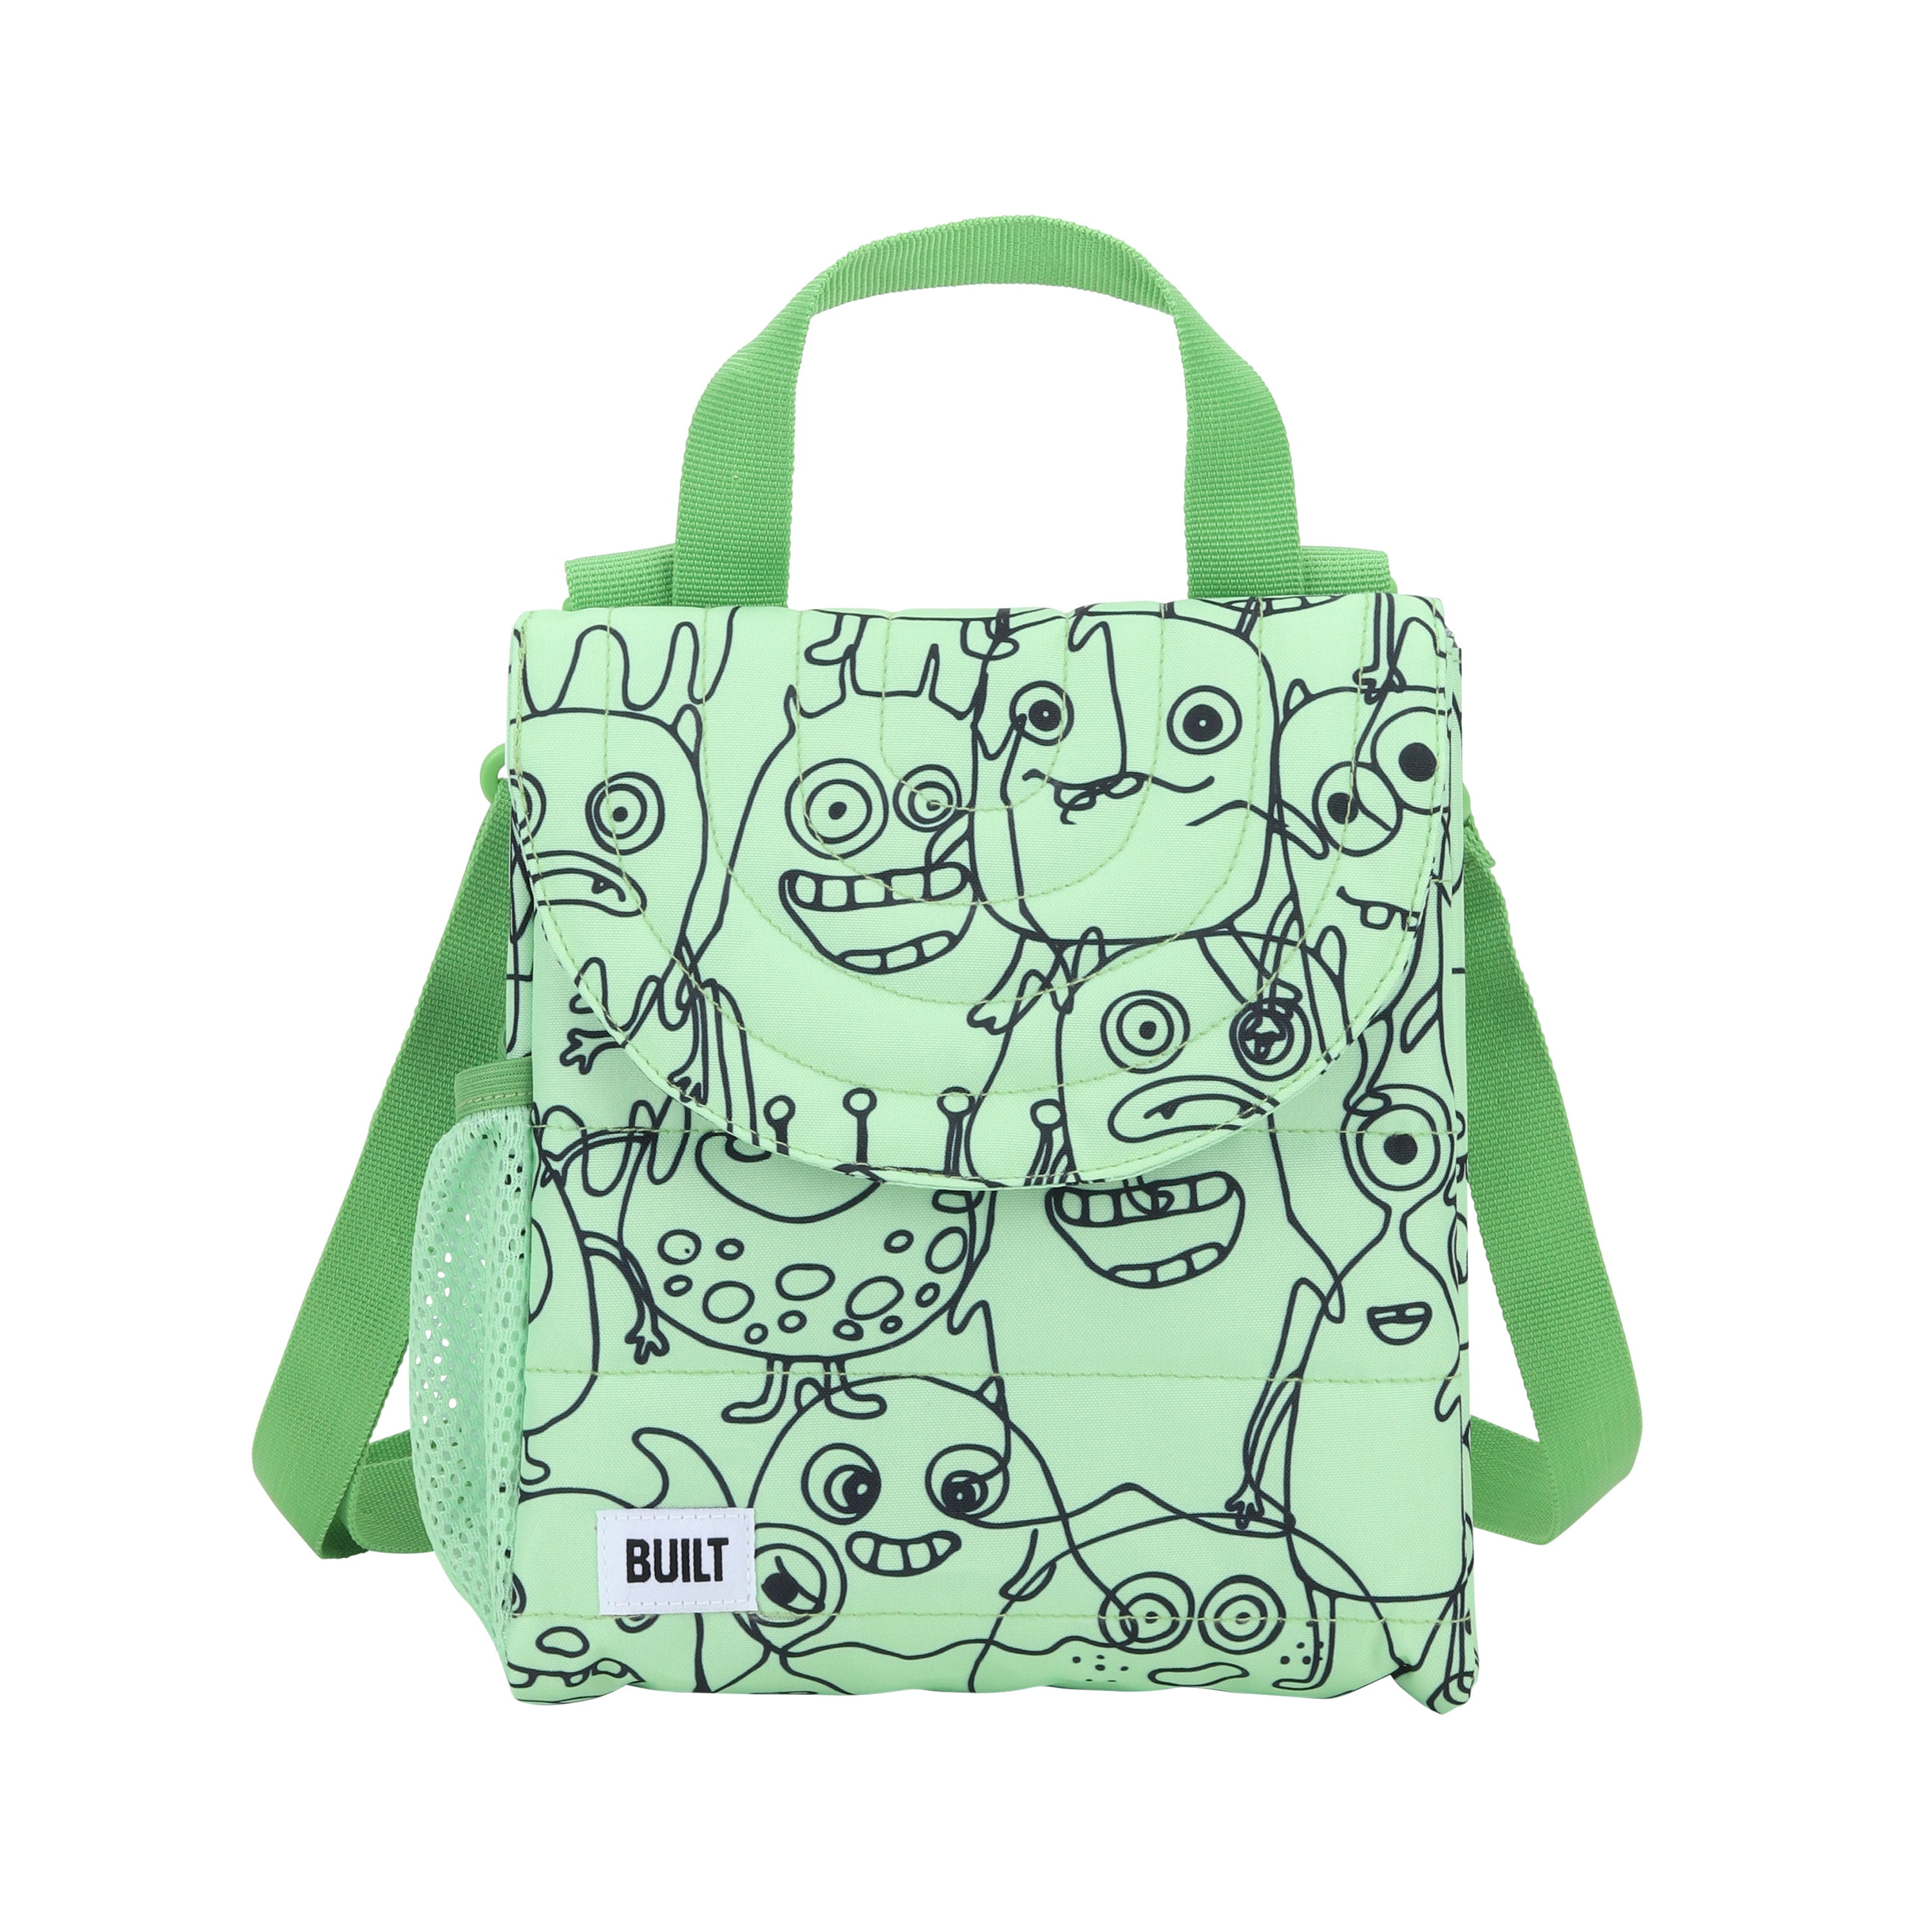 Kigai Plain Neon Green Solid Color School Lunchbox for Boys Girls,Insulated  Lunch Tote Bag with Adju…See more Kigai Plain Neon Green Solid Color